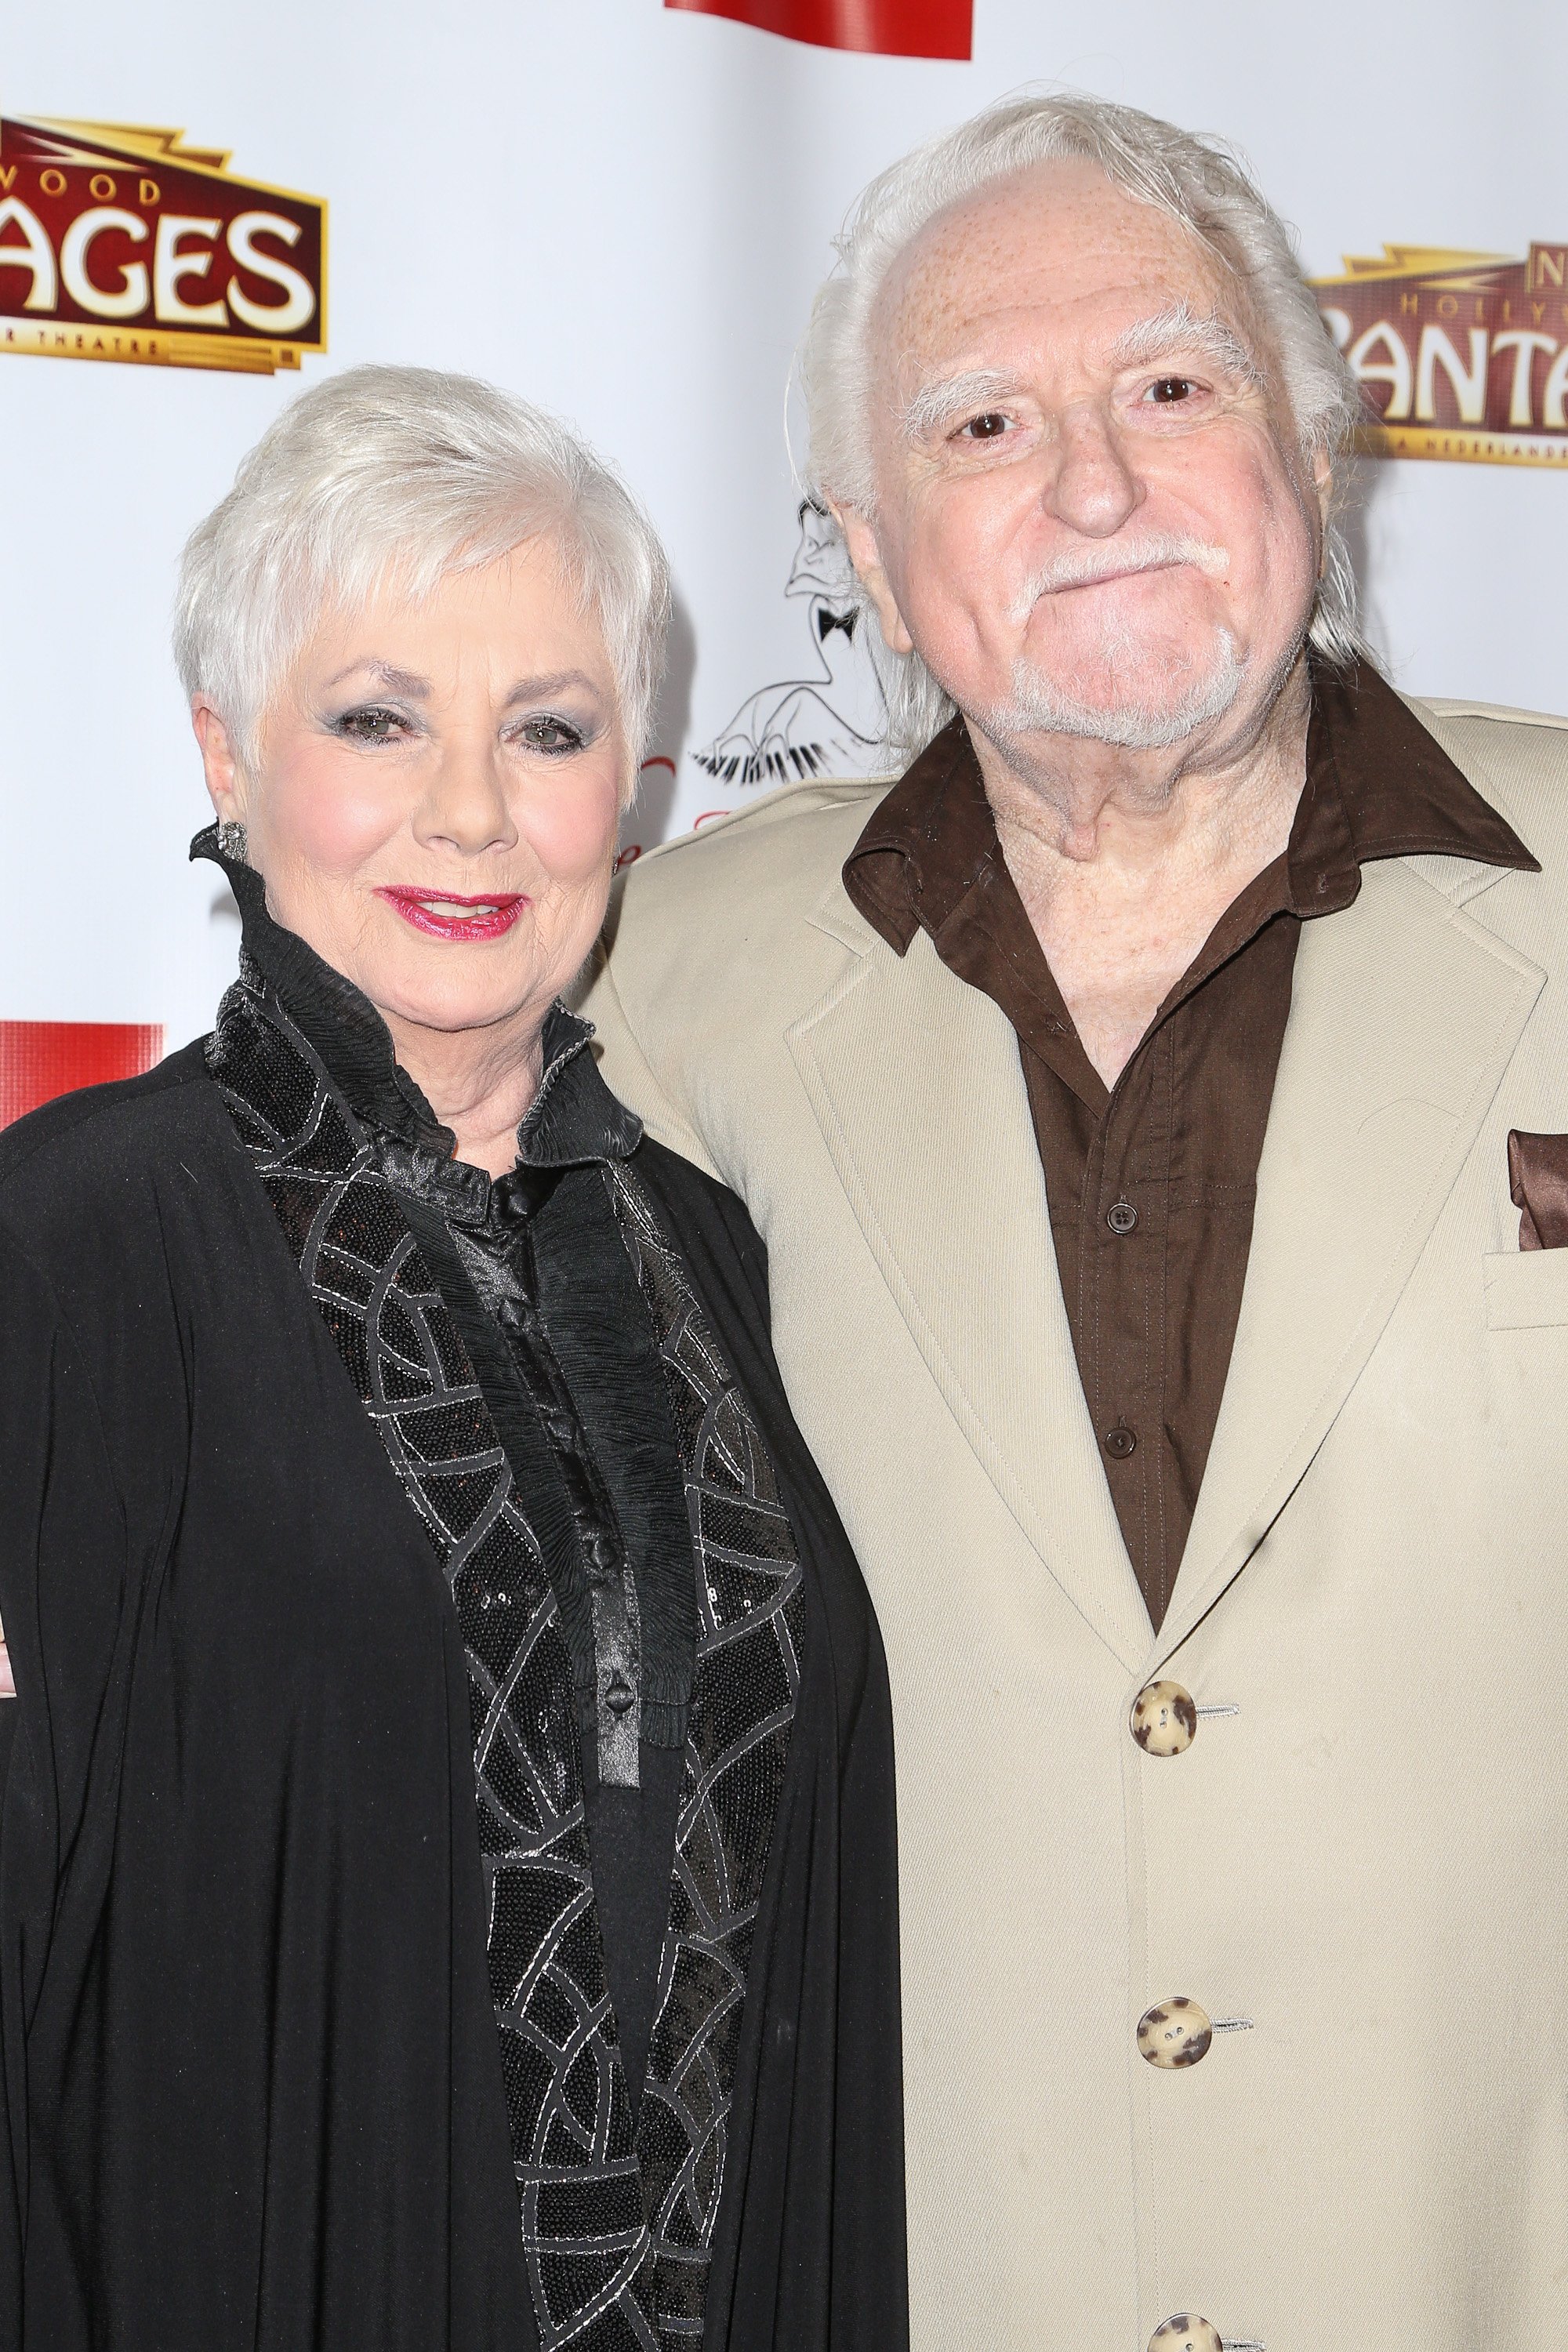 Shirley Jones and Marty Ingels at the 3rd annual Jerry Herman Awards on June 1, 2014, in Hollywood, California. | Source: Chelsea Lauren/Getty Images